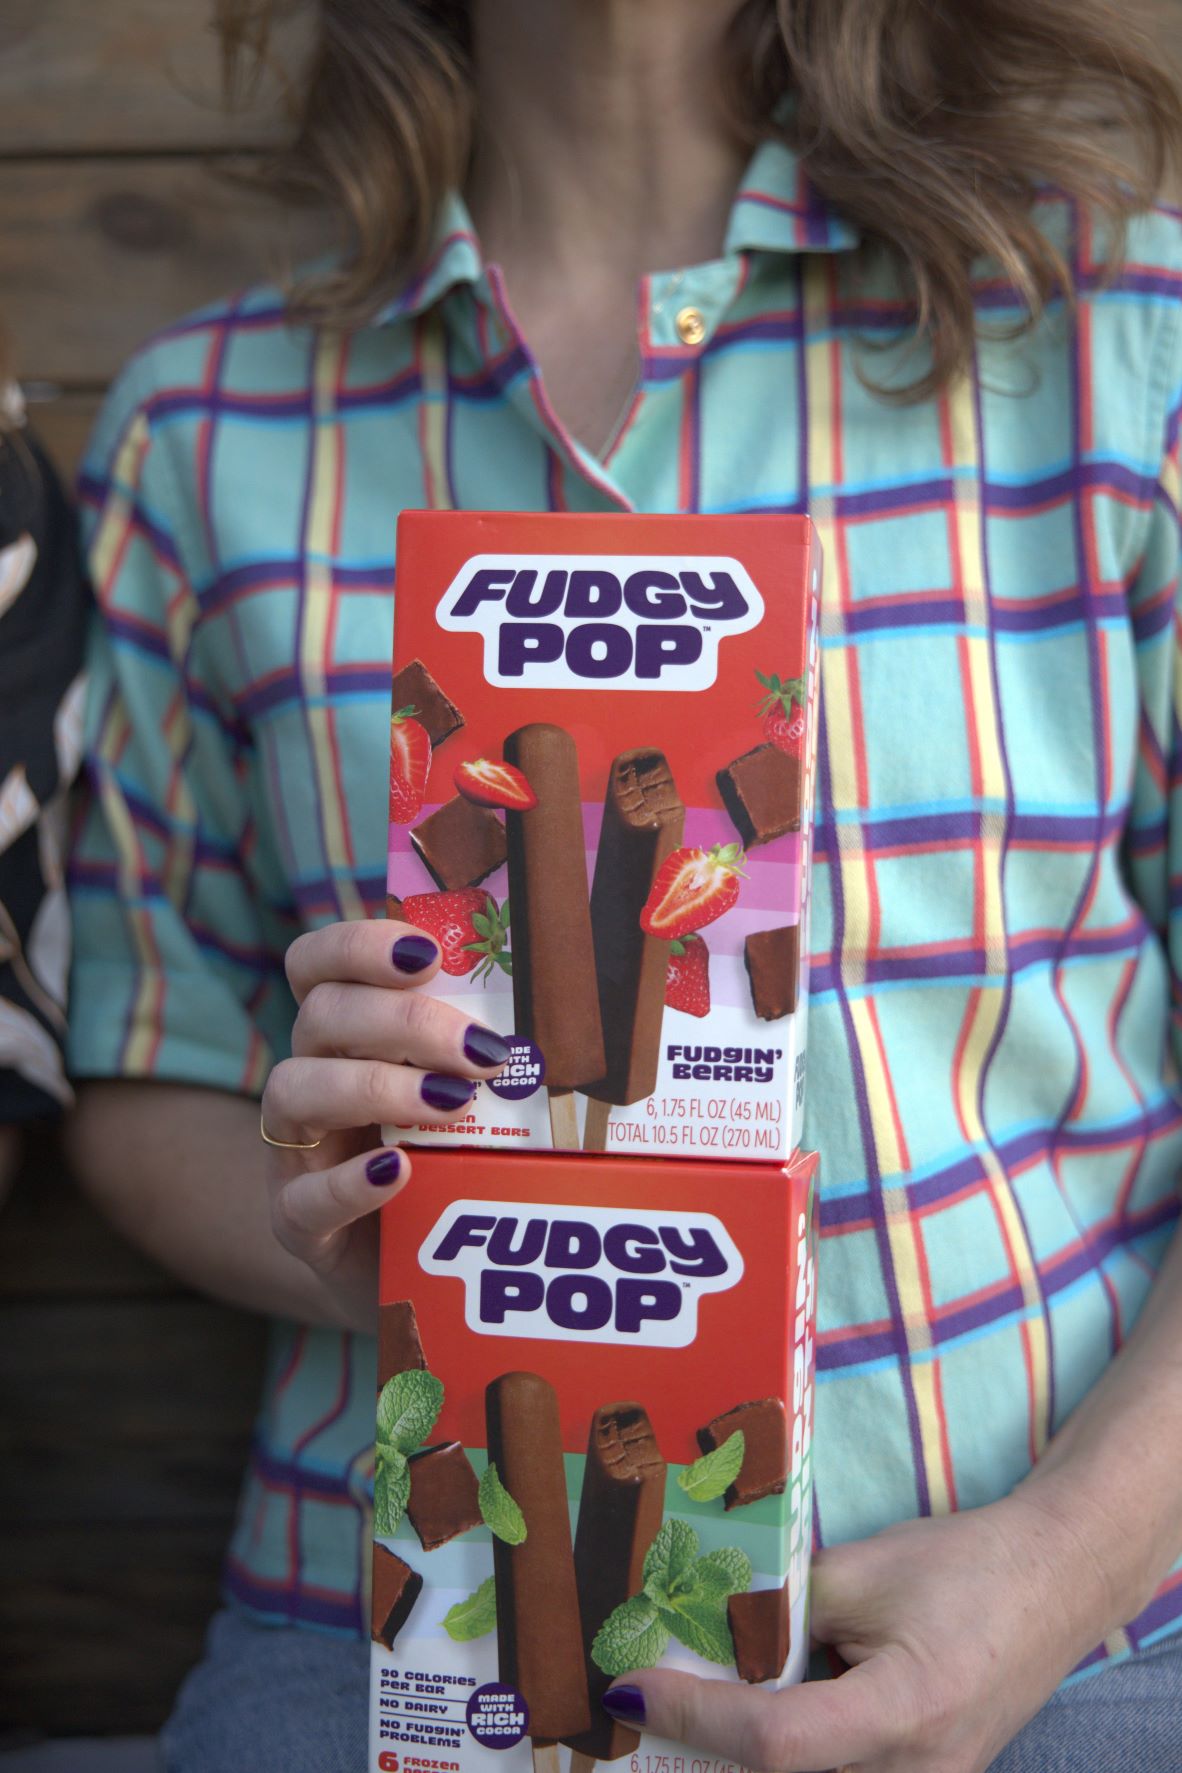 Two stacked boxes of Fudgy Pop